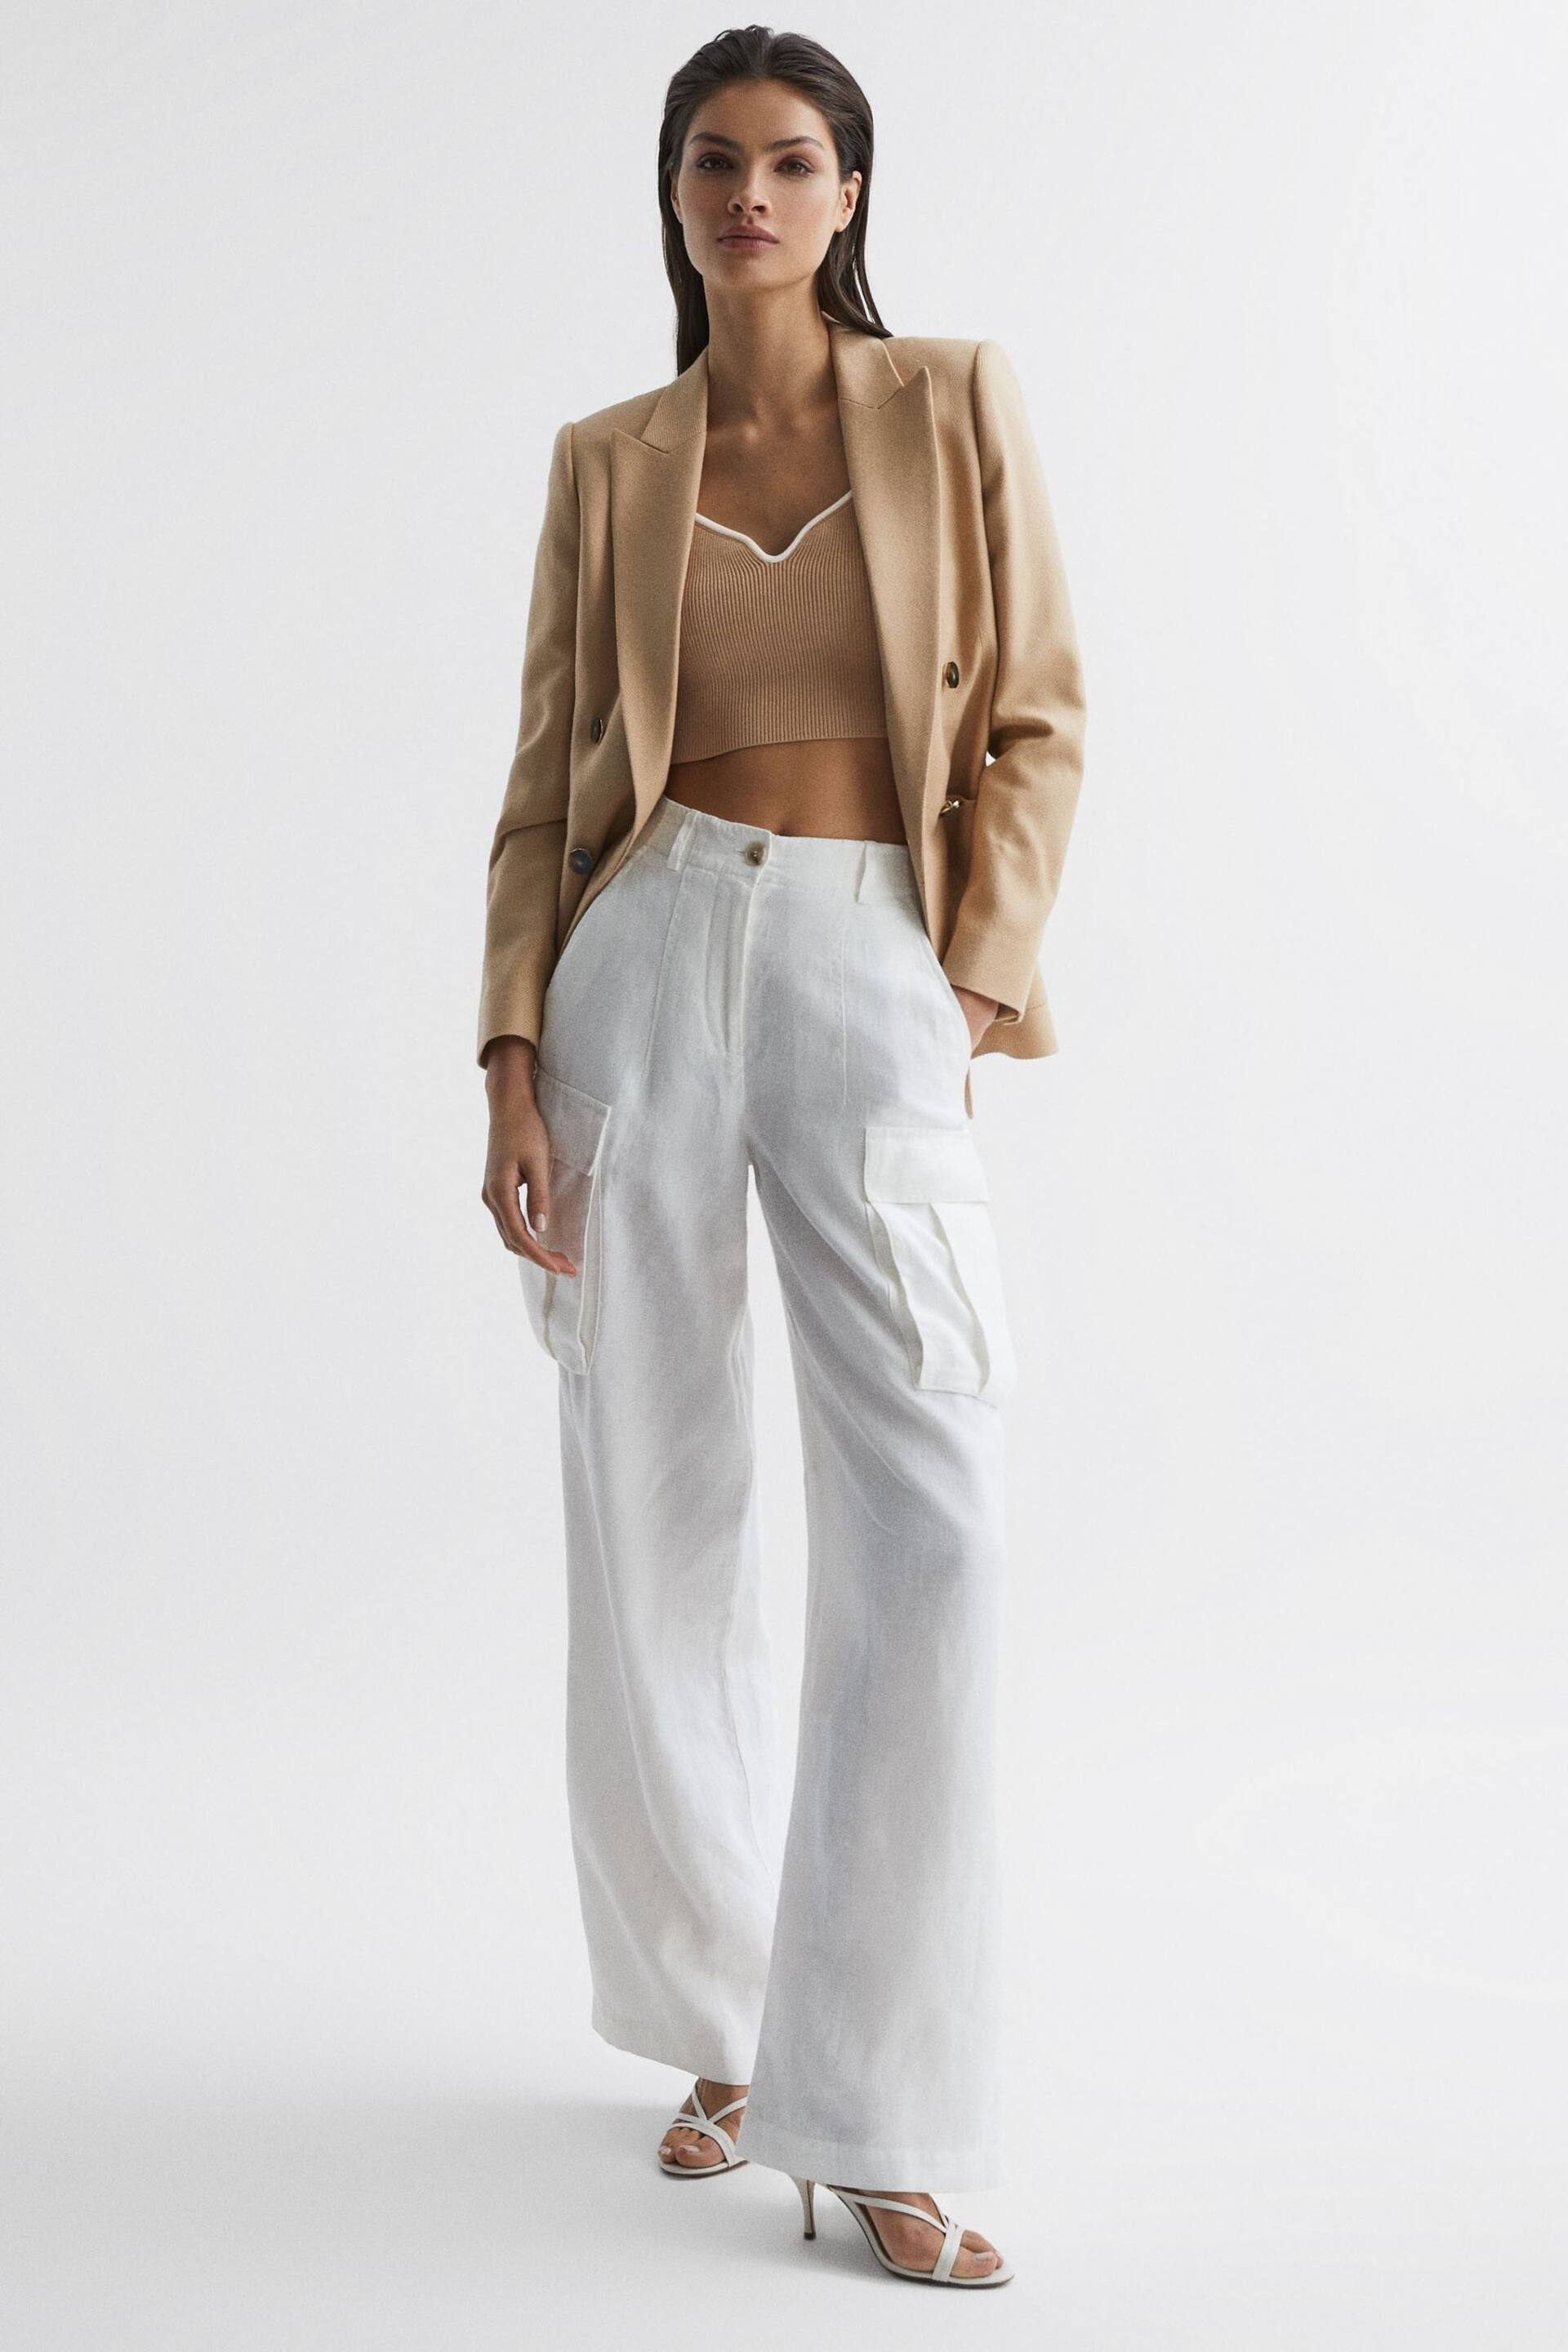 Reiss Camel/Ivory Marion Cropped Sweetheart Neckline Top - Image 3 of 5